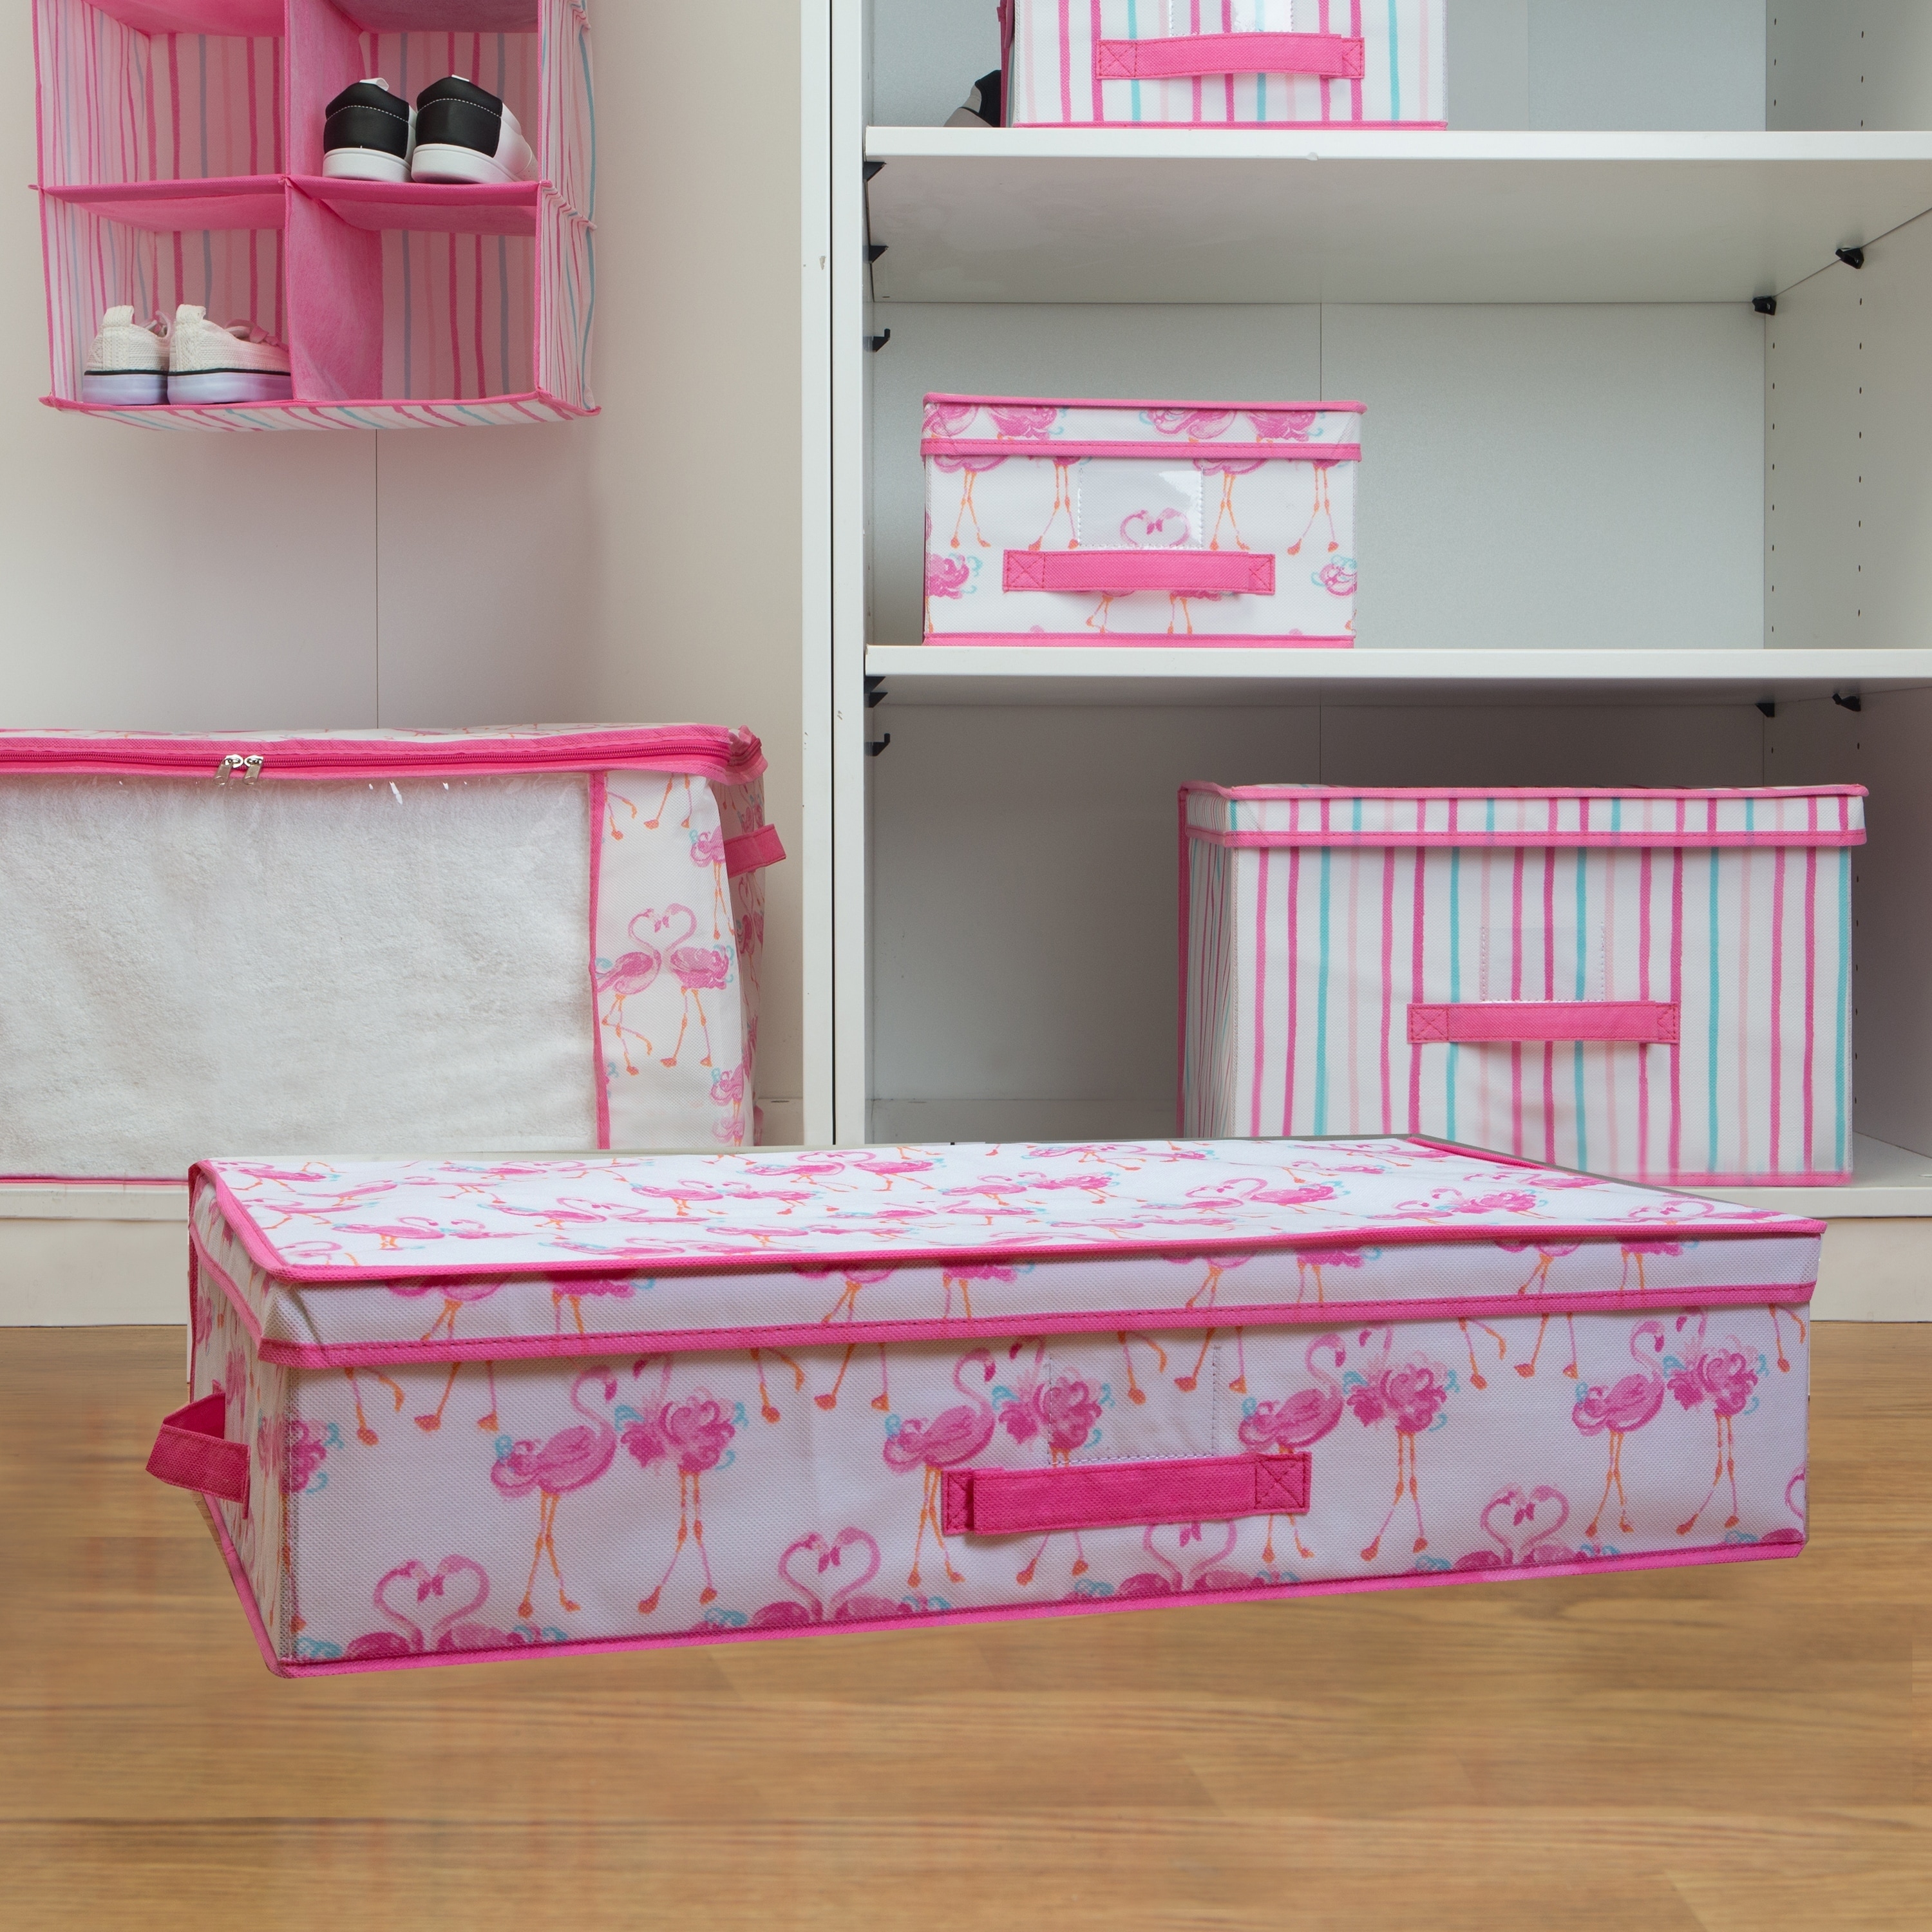 laura ashley childrens bed